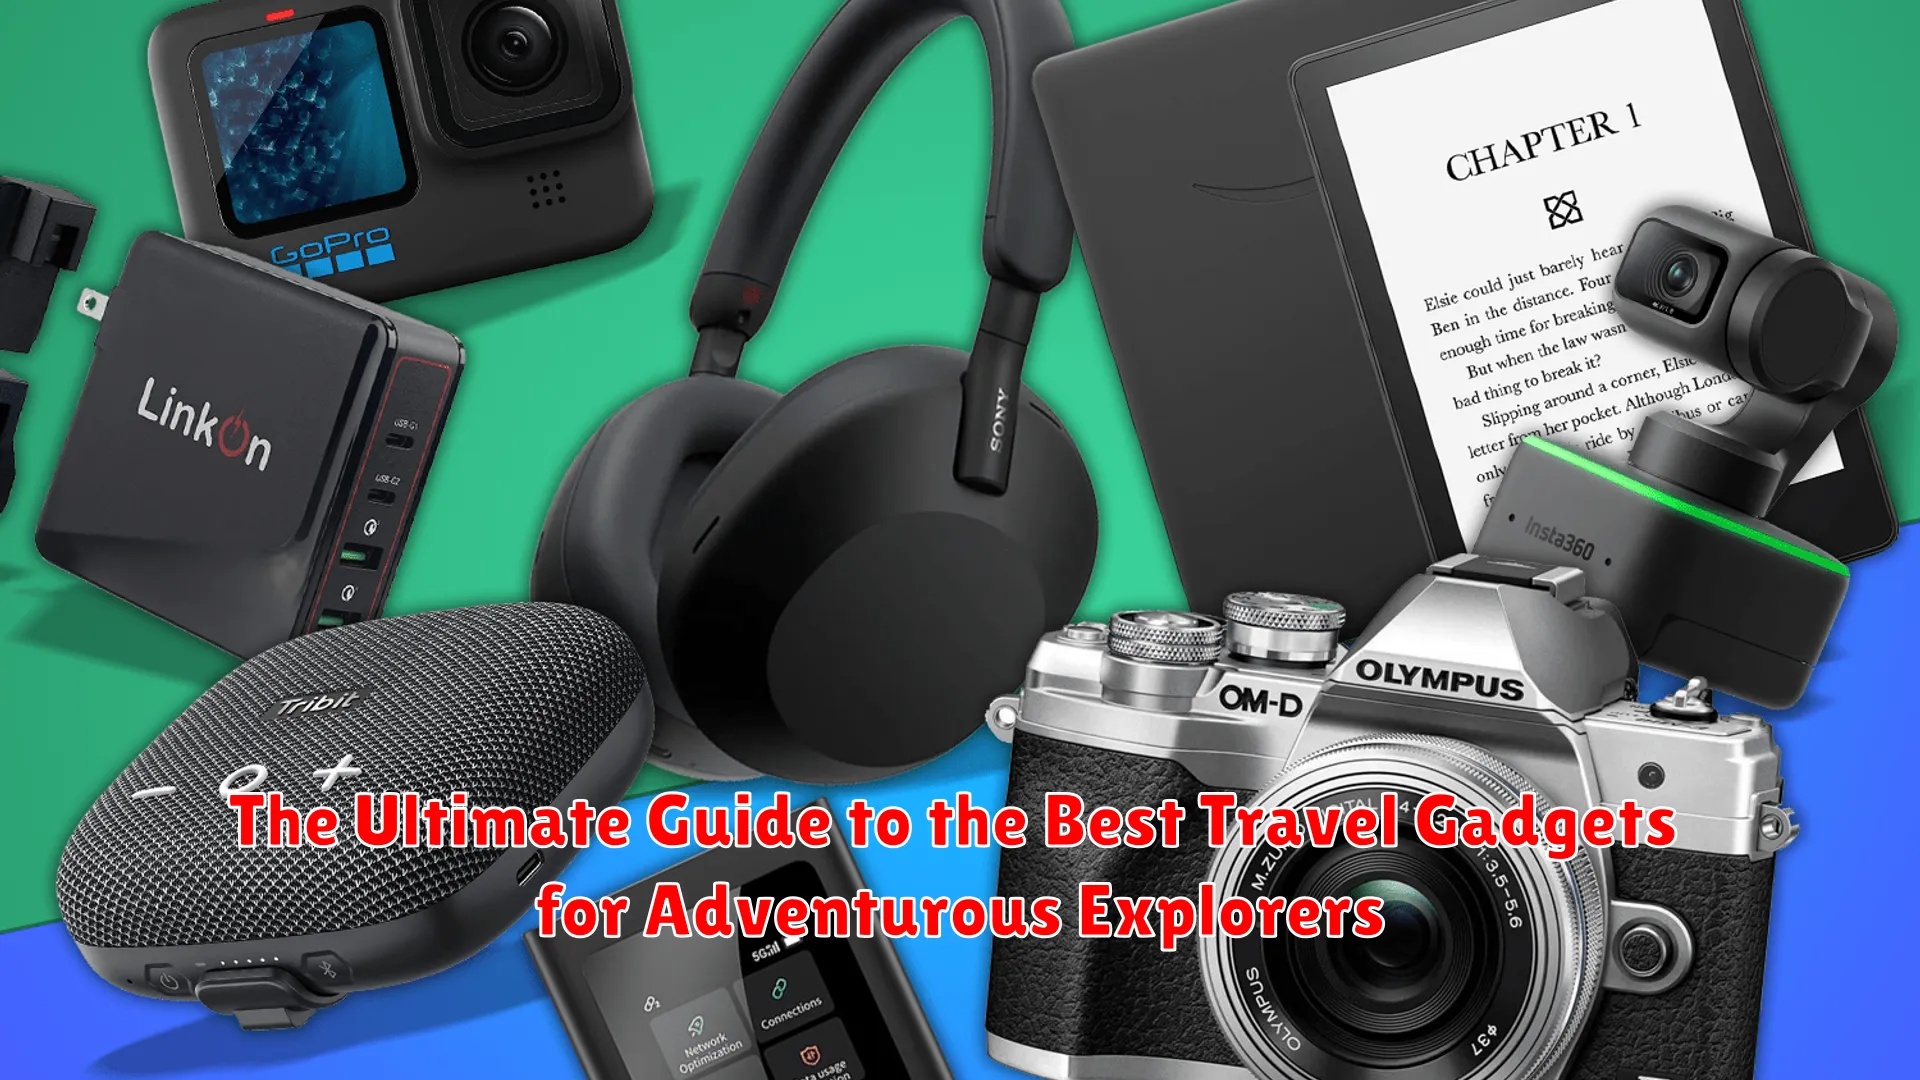 The Ultimate Guide to the Best Travel Gadgets for Adventurous Explorers